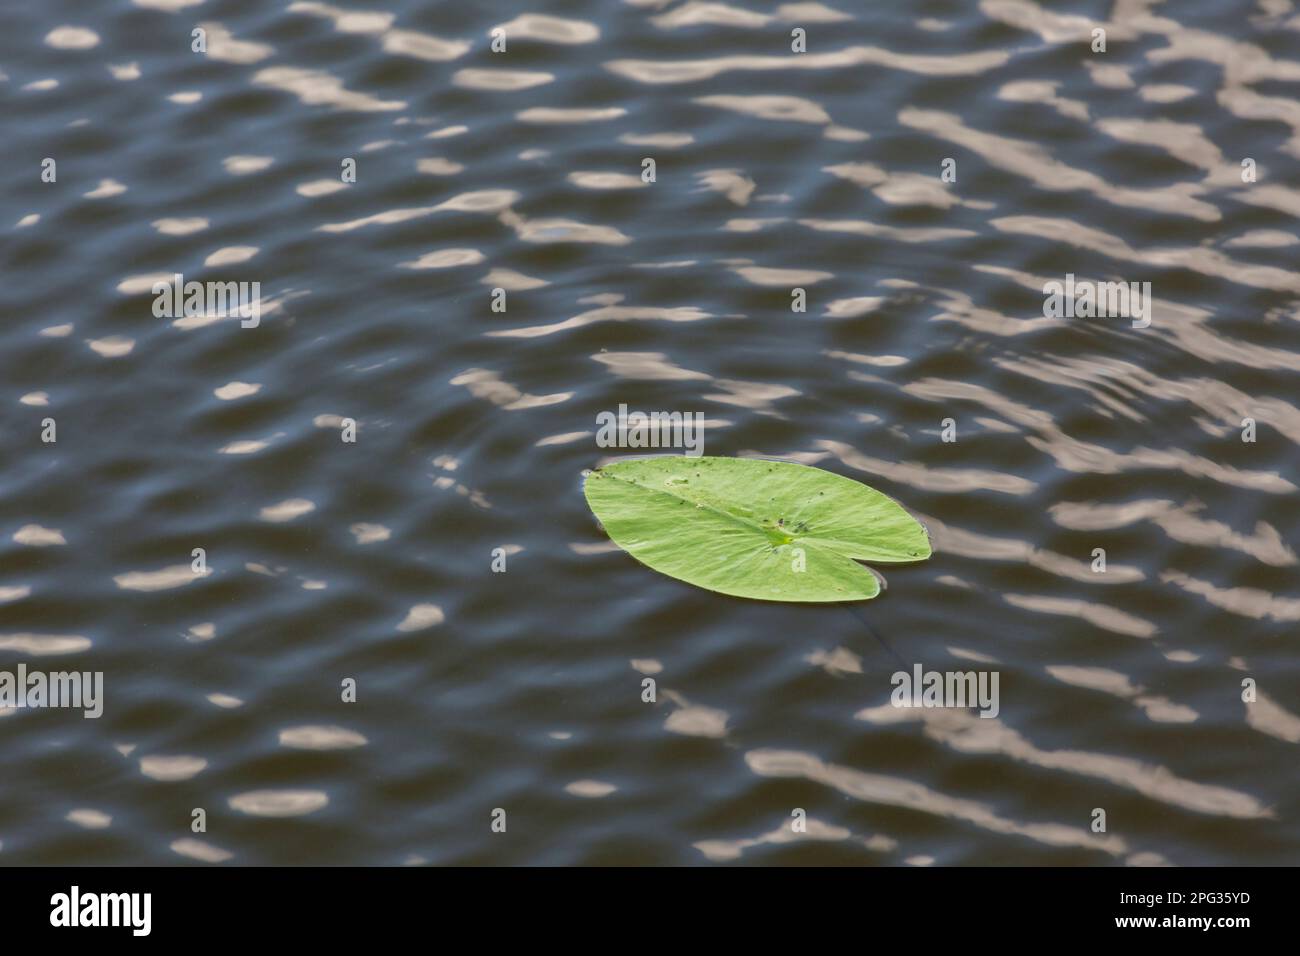 White Water Lily (Nymphaea alba). Leaf floating on water. Sweden Stock Photo